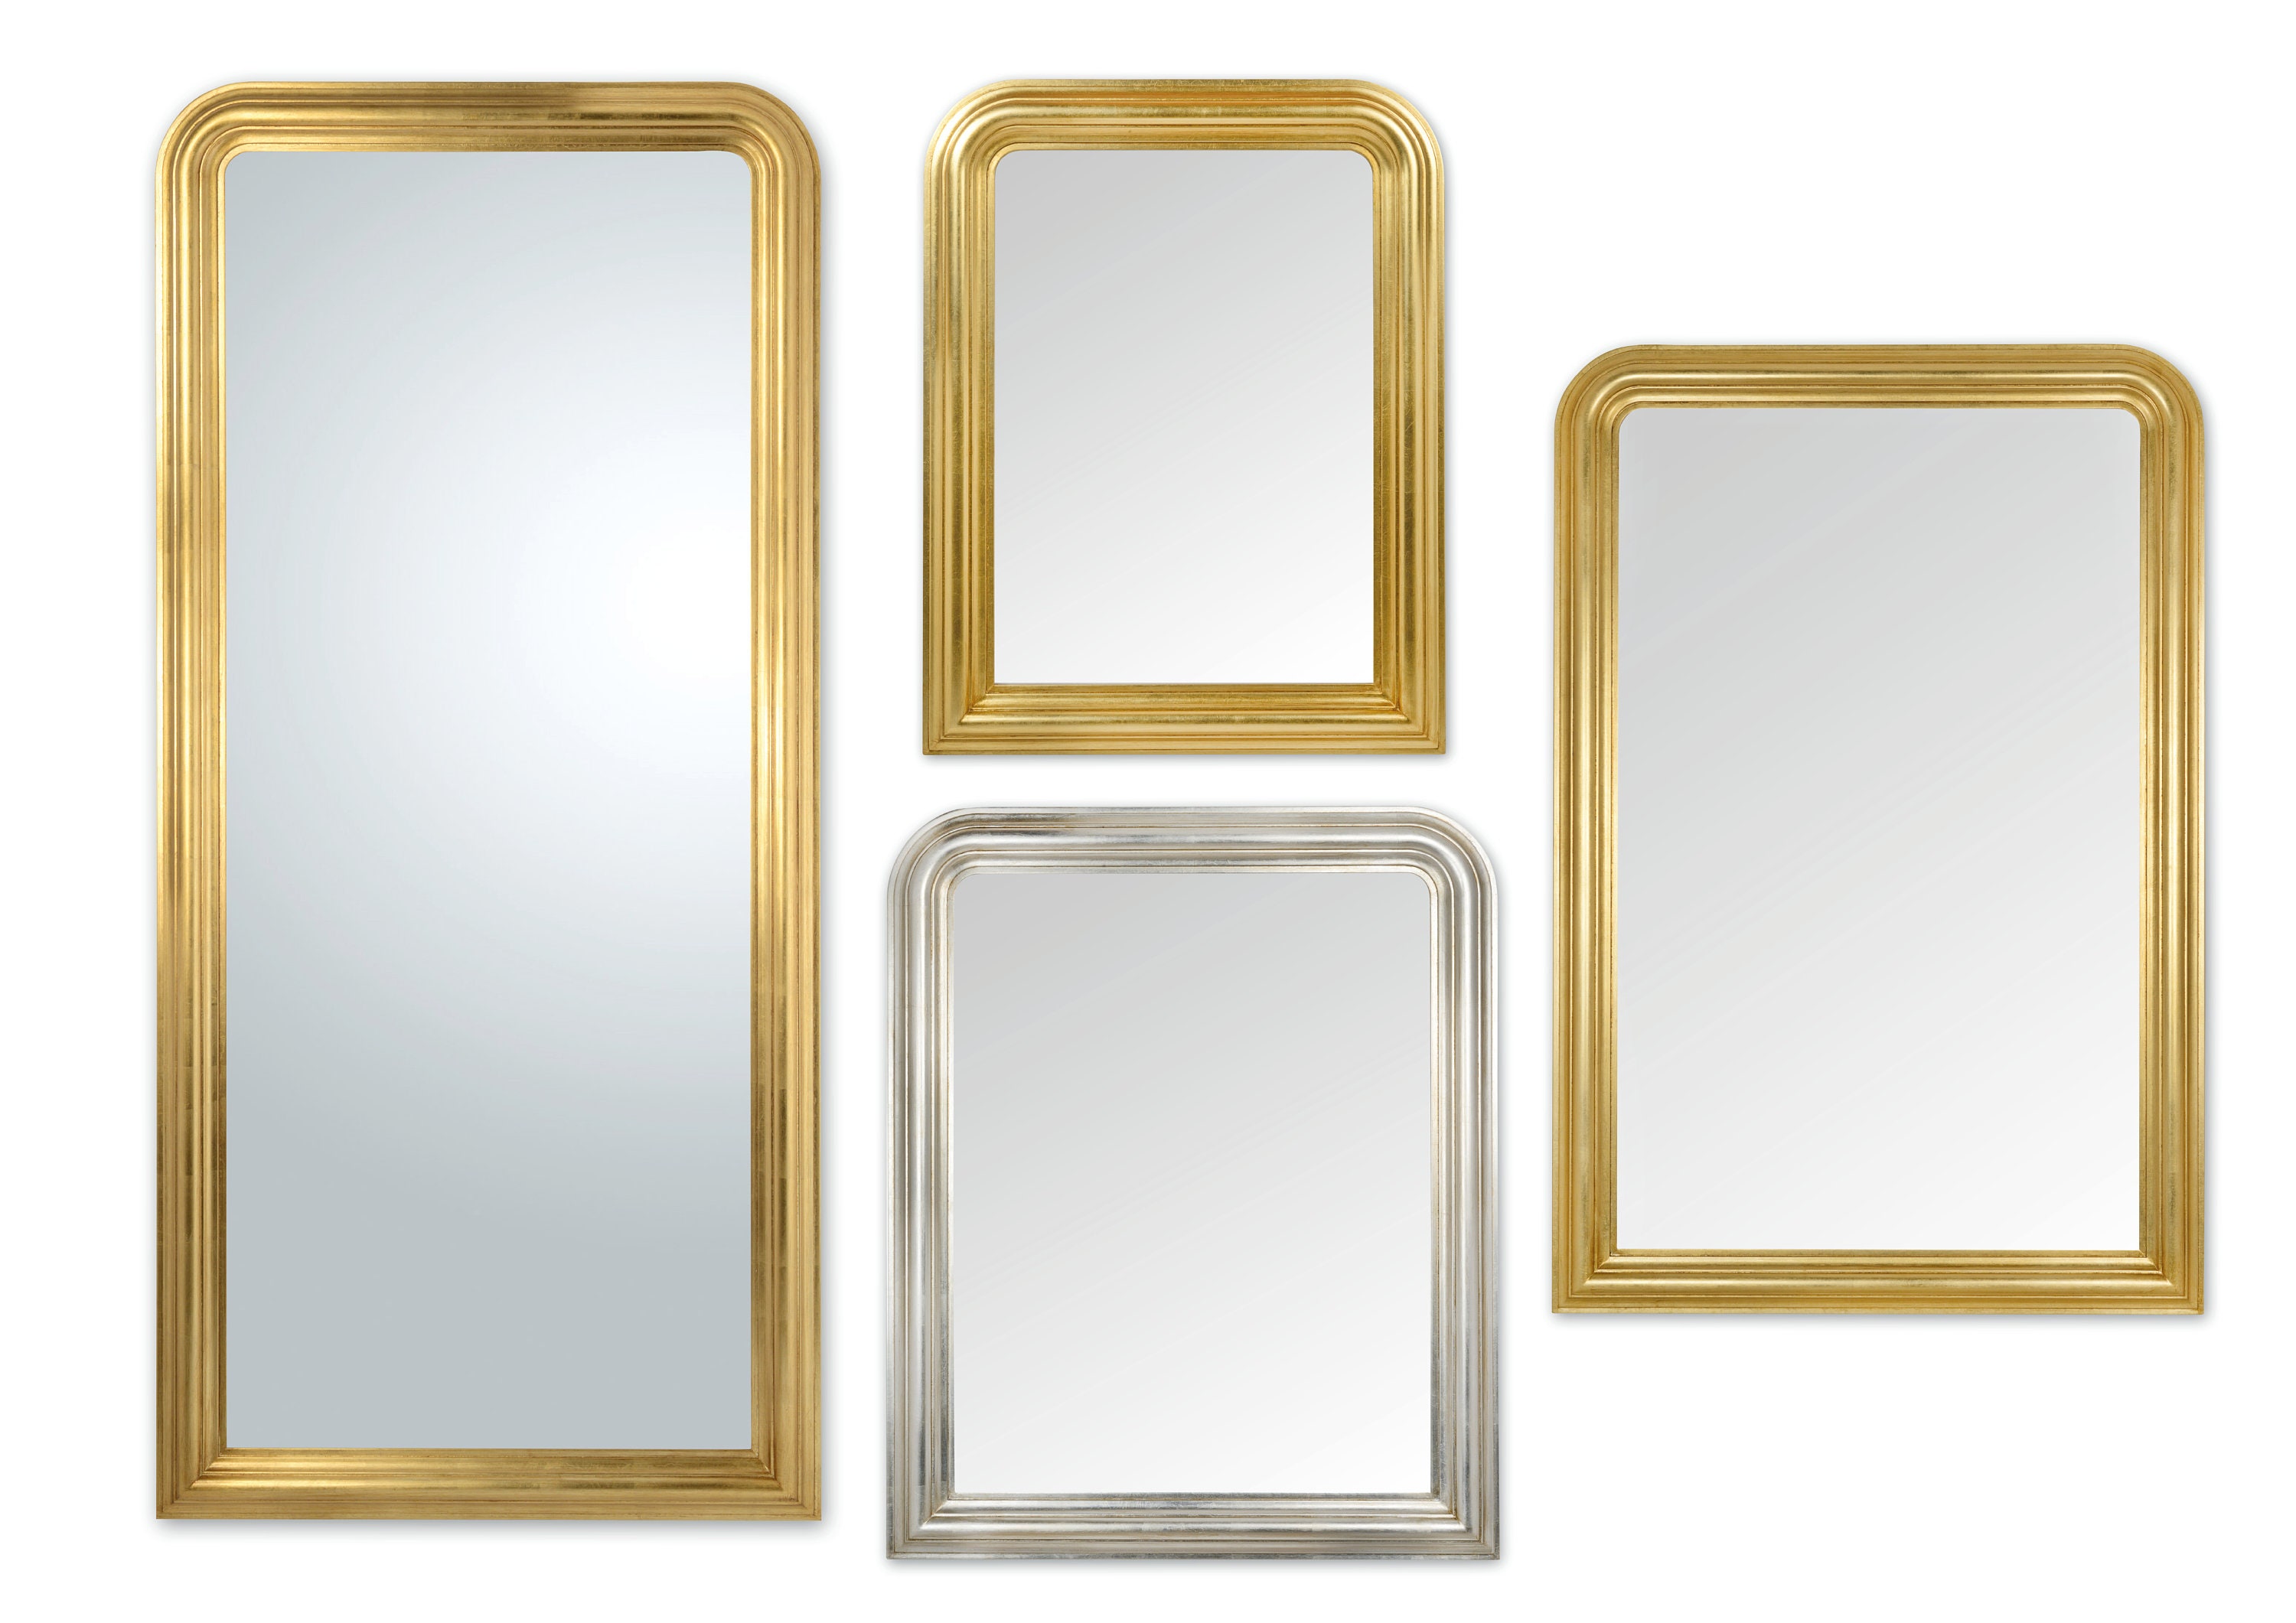 Etched Gold Finish Louis Philippe Mirror For Sale